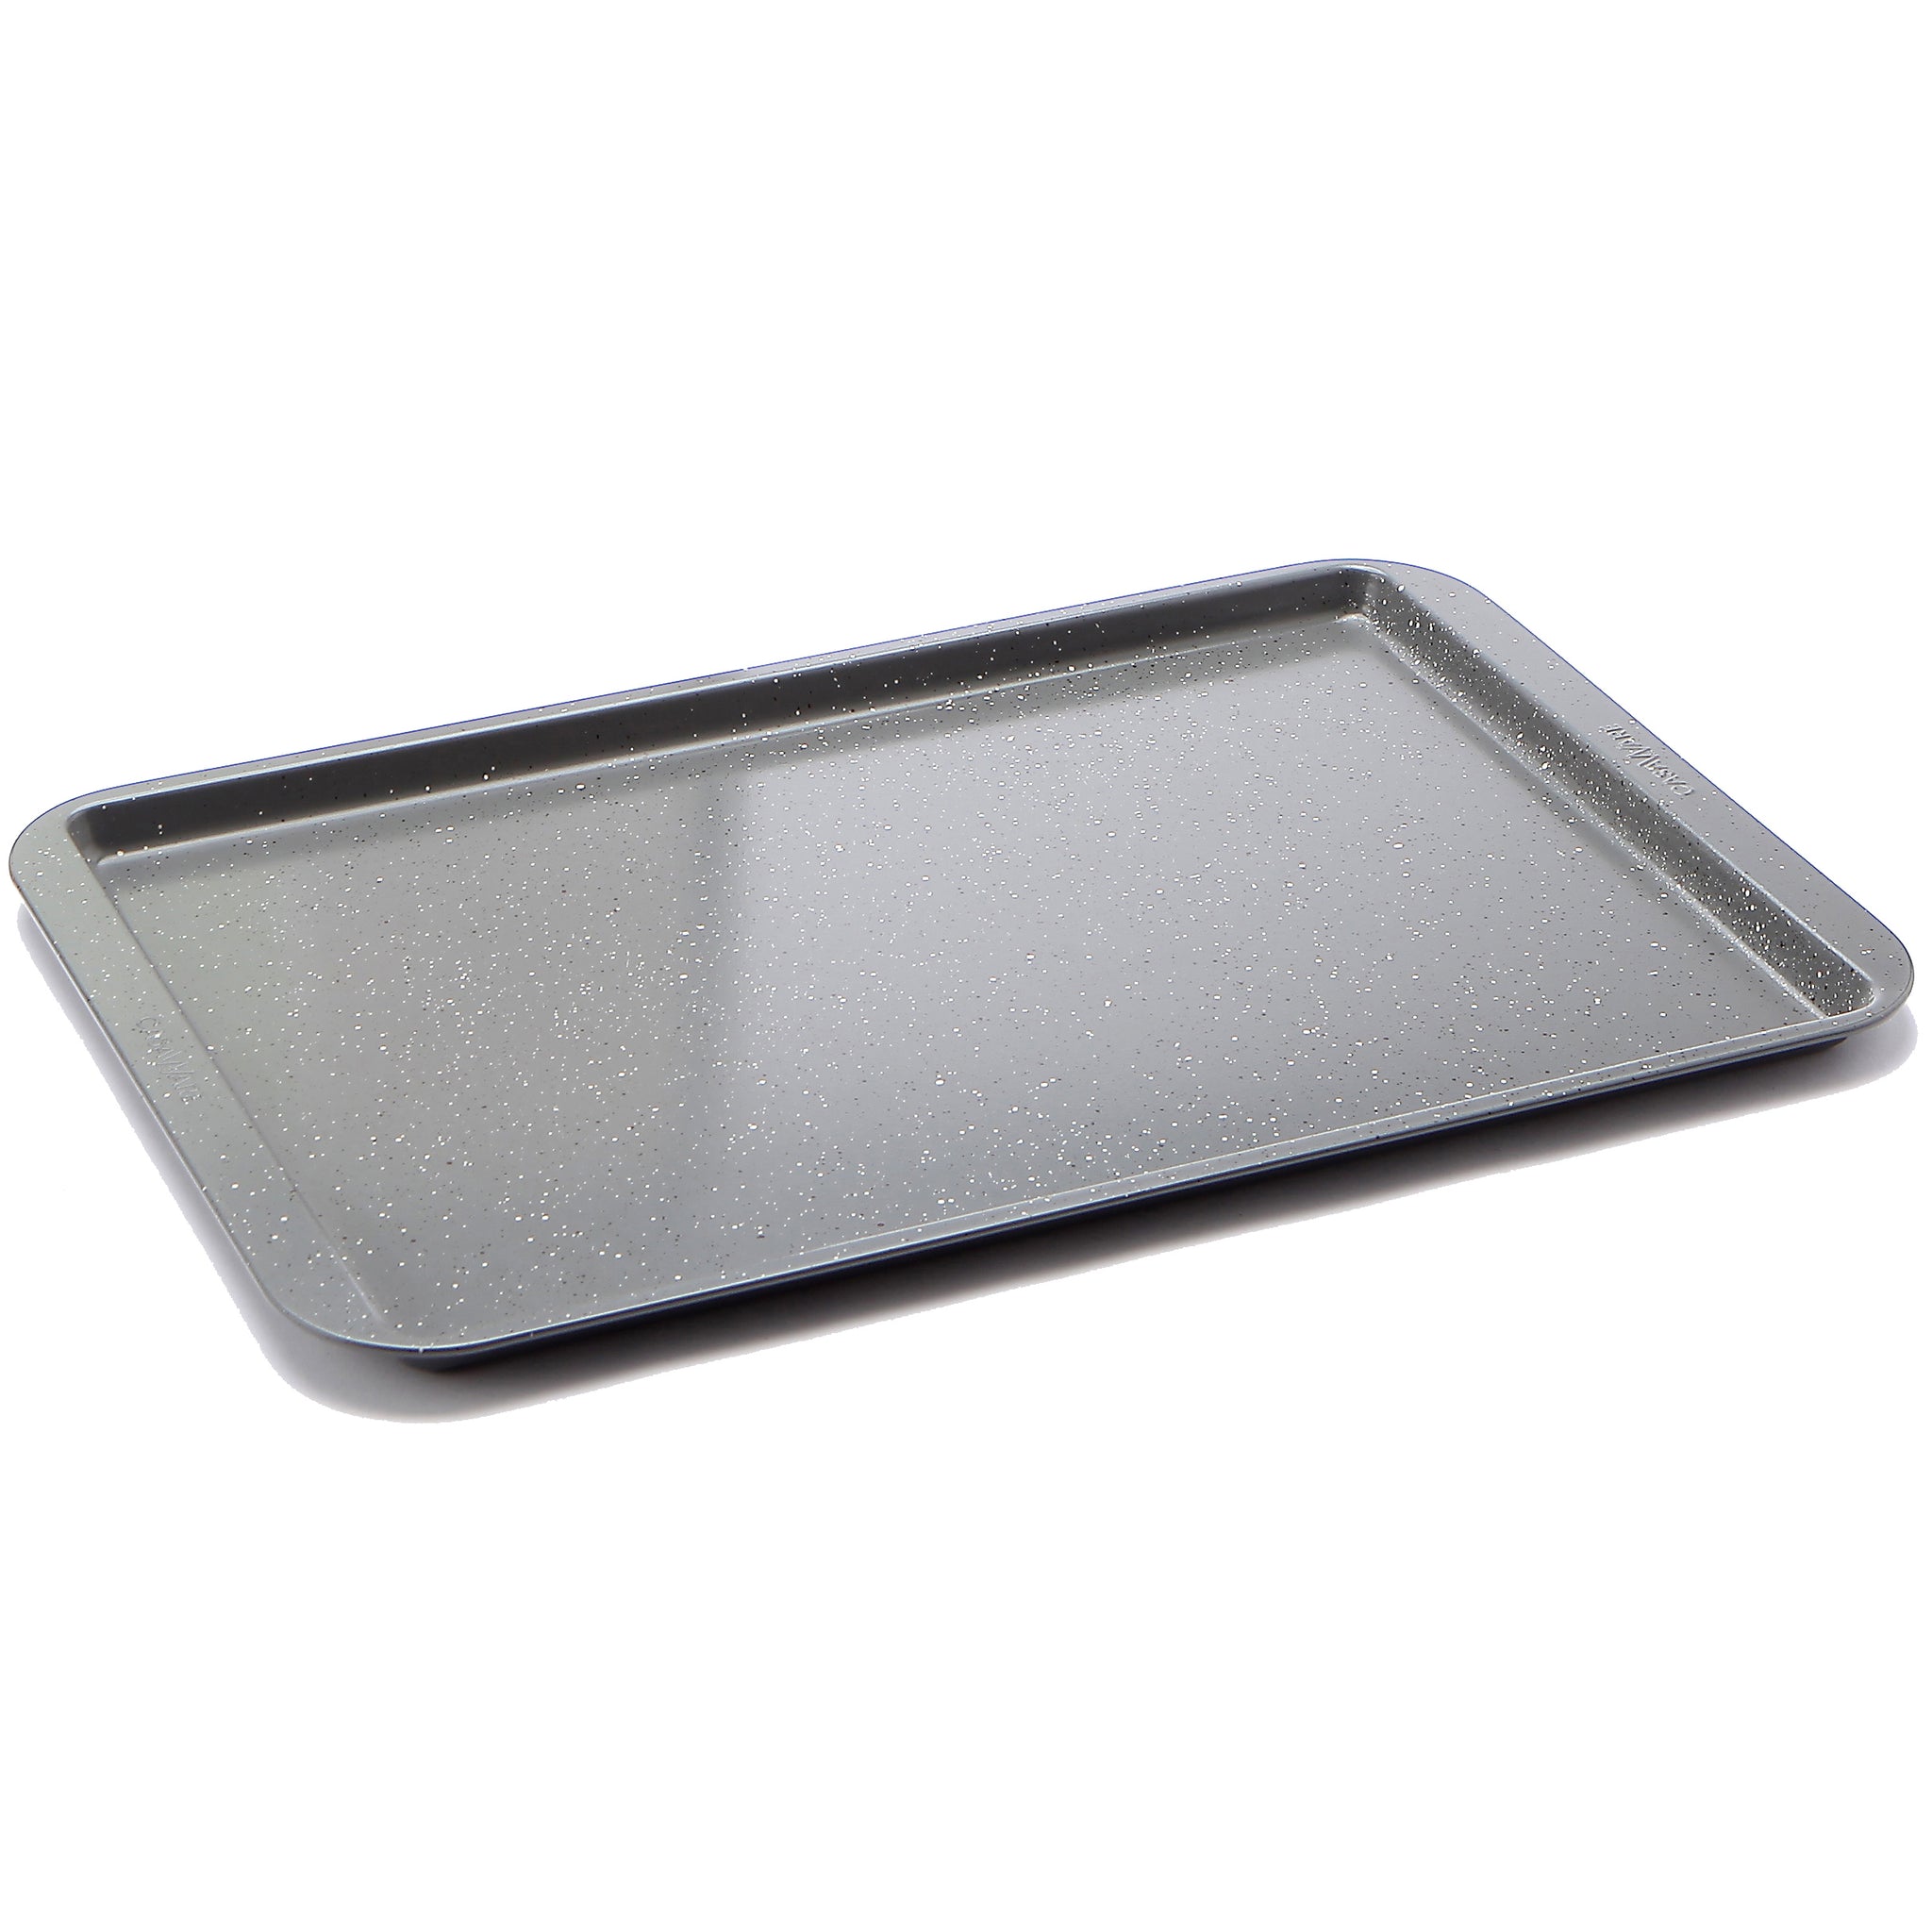 CasaWare Ceramic Coated NonStick Cookie/Jelly Roll Pan 11x17 (Silver -  LaPrima Shops®